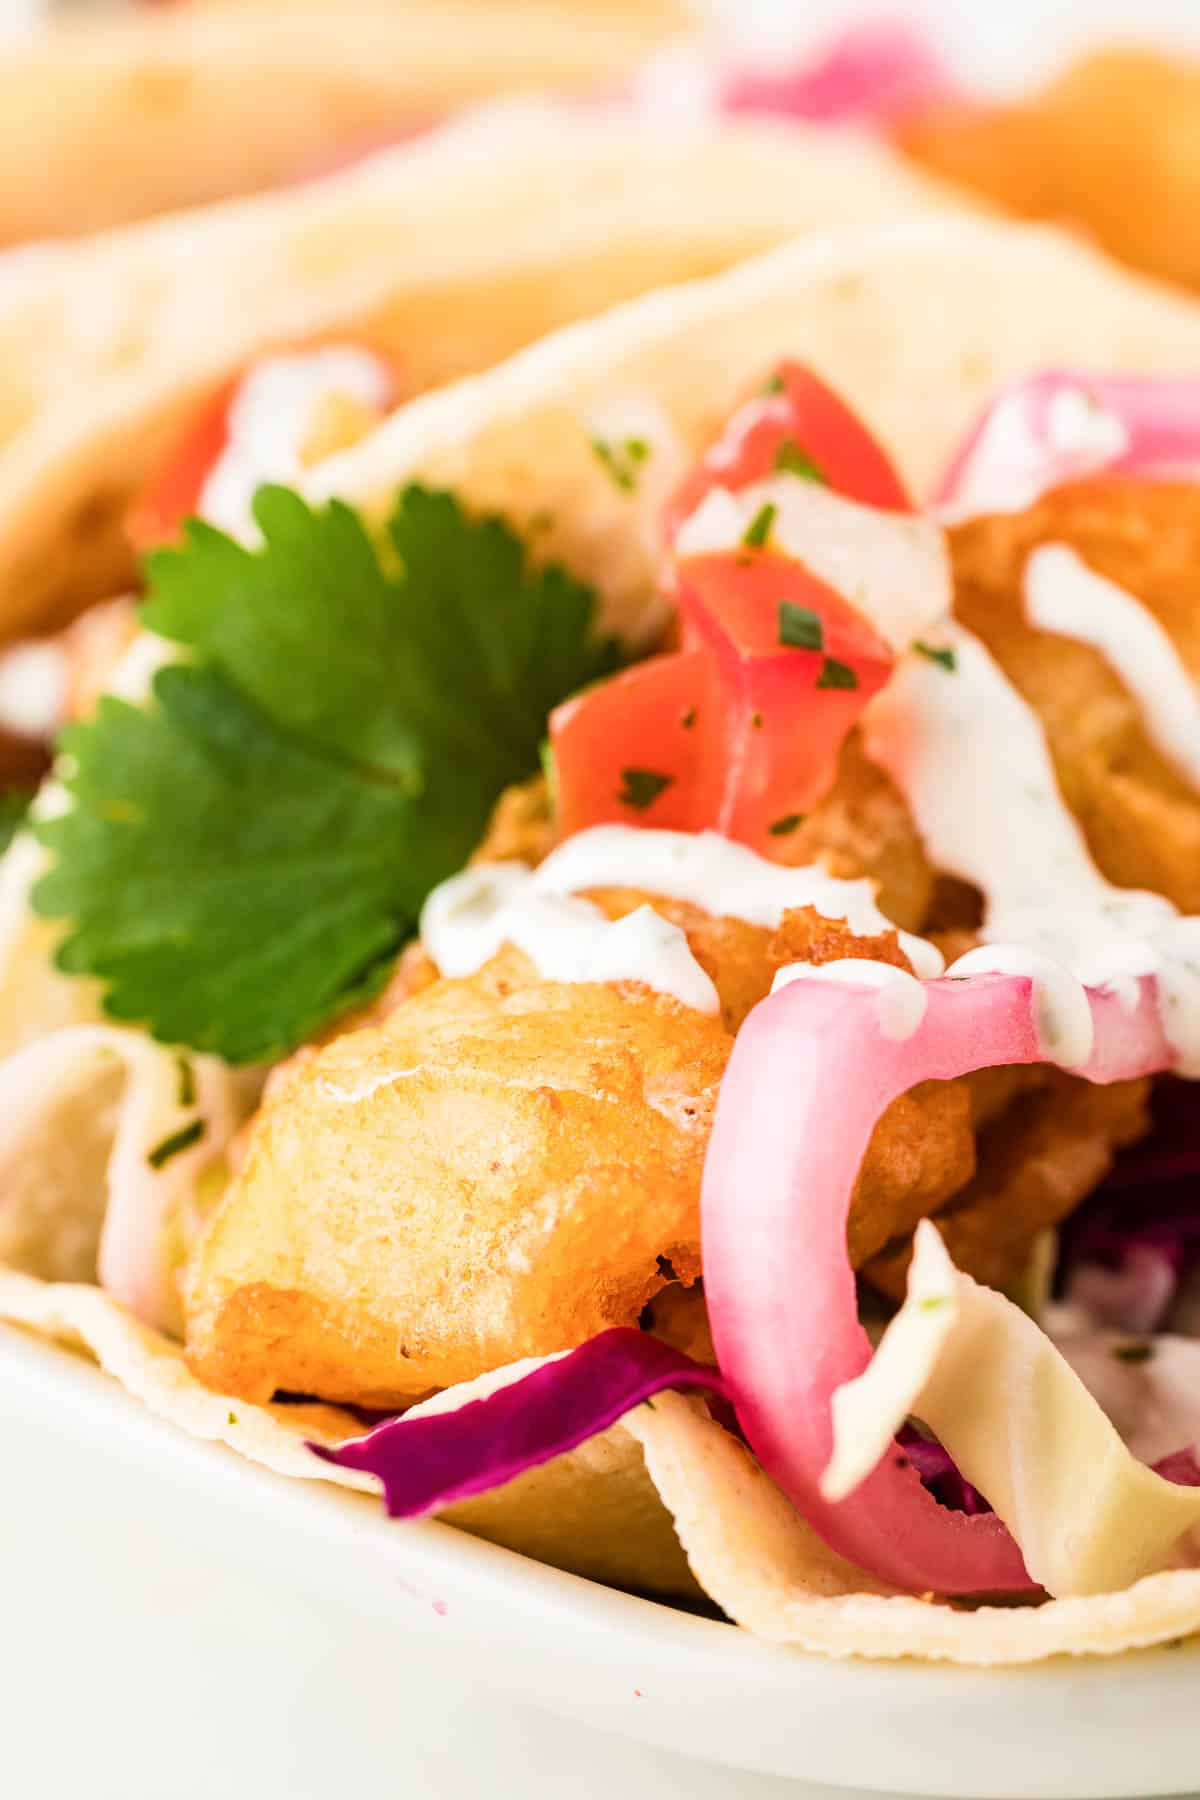 Beer battered fish tacos on a white plate.